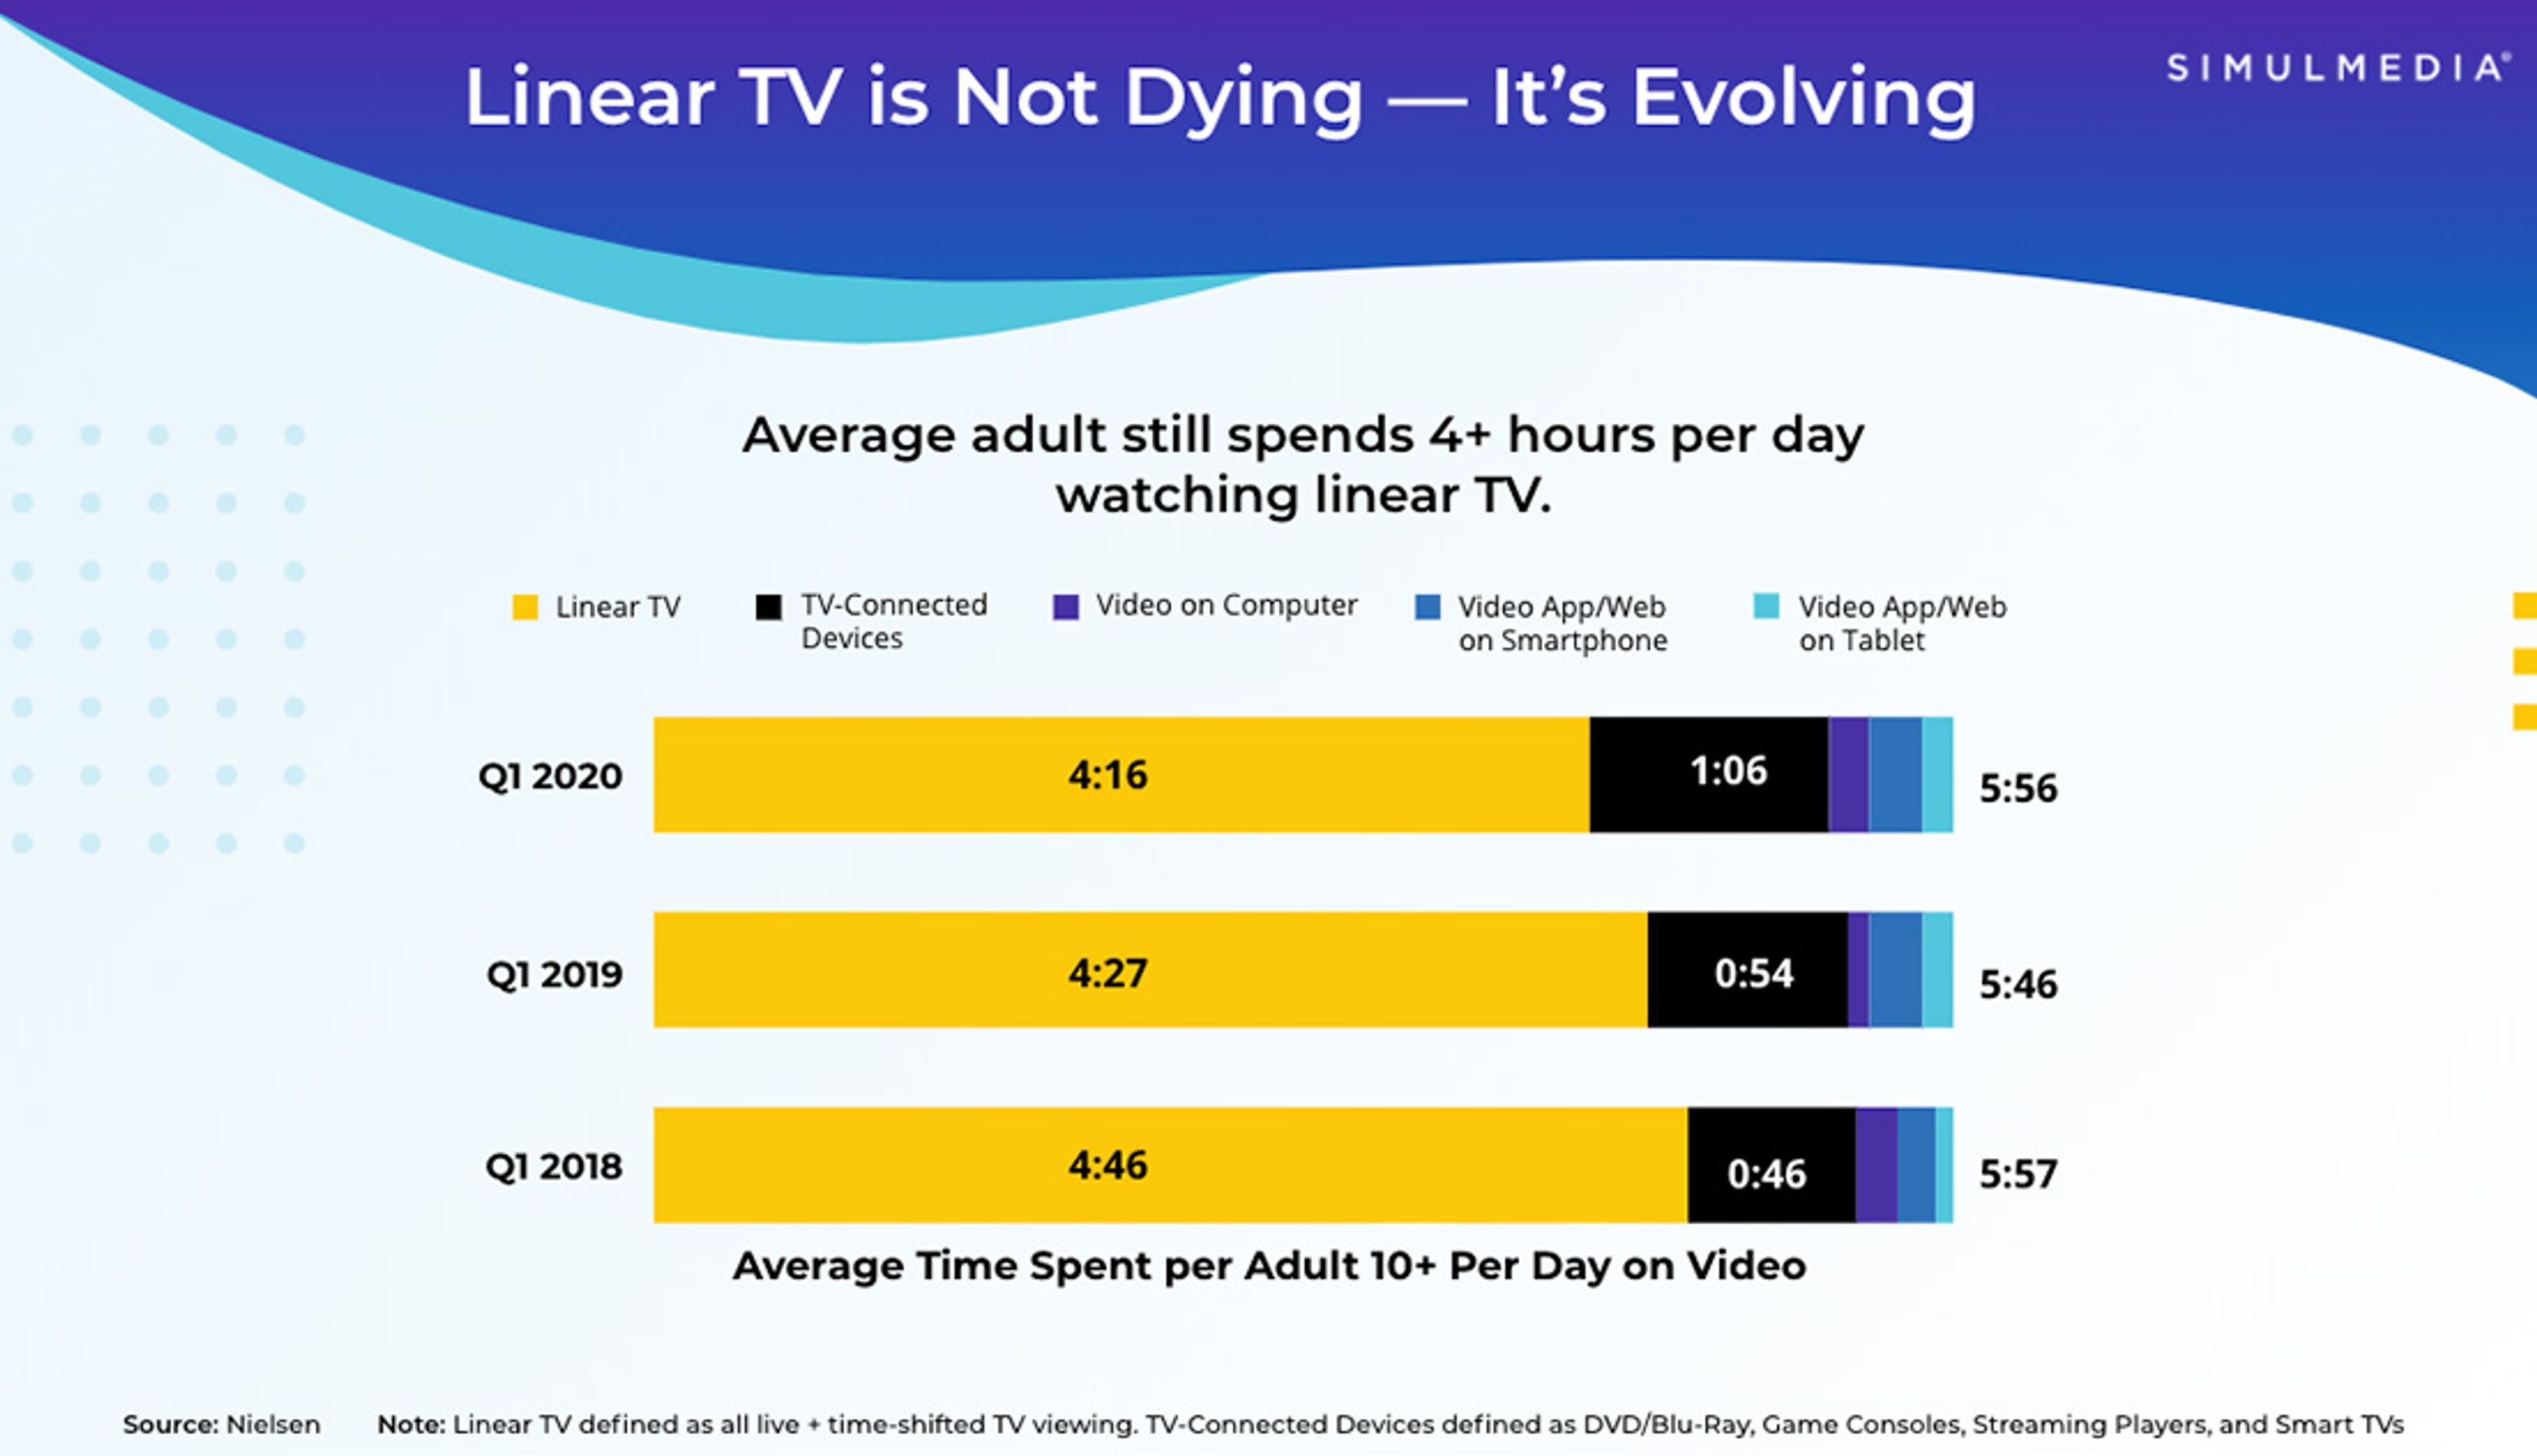 Bar chart showing time spent per day across channels and devices.